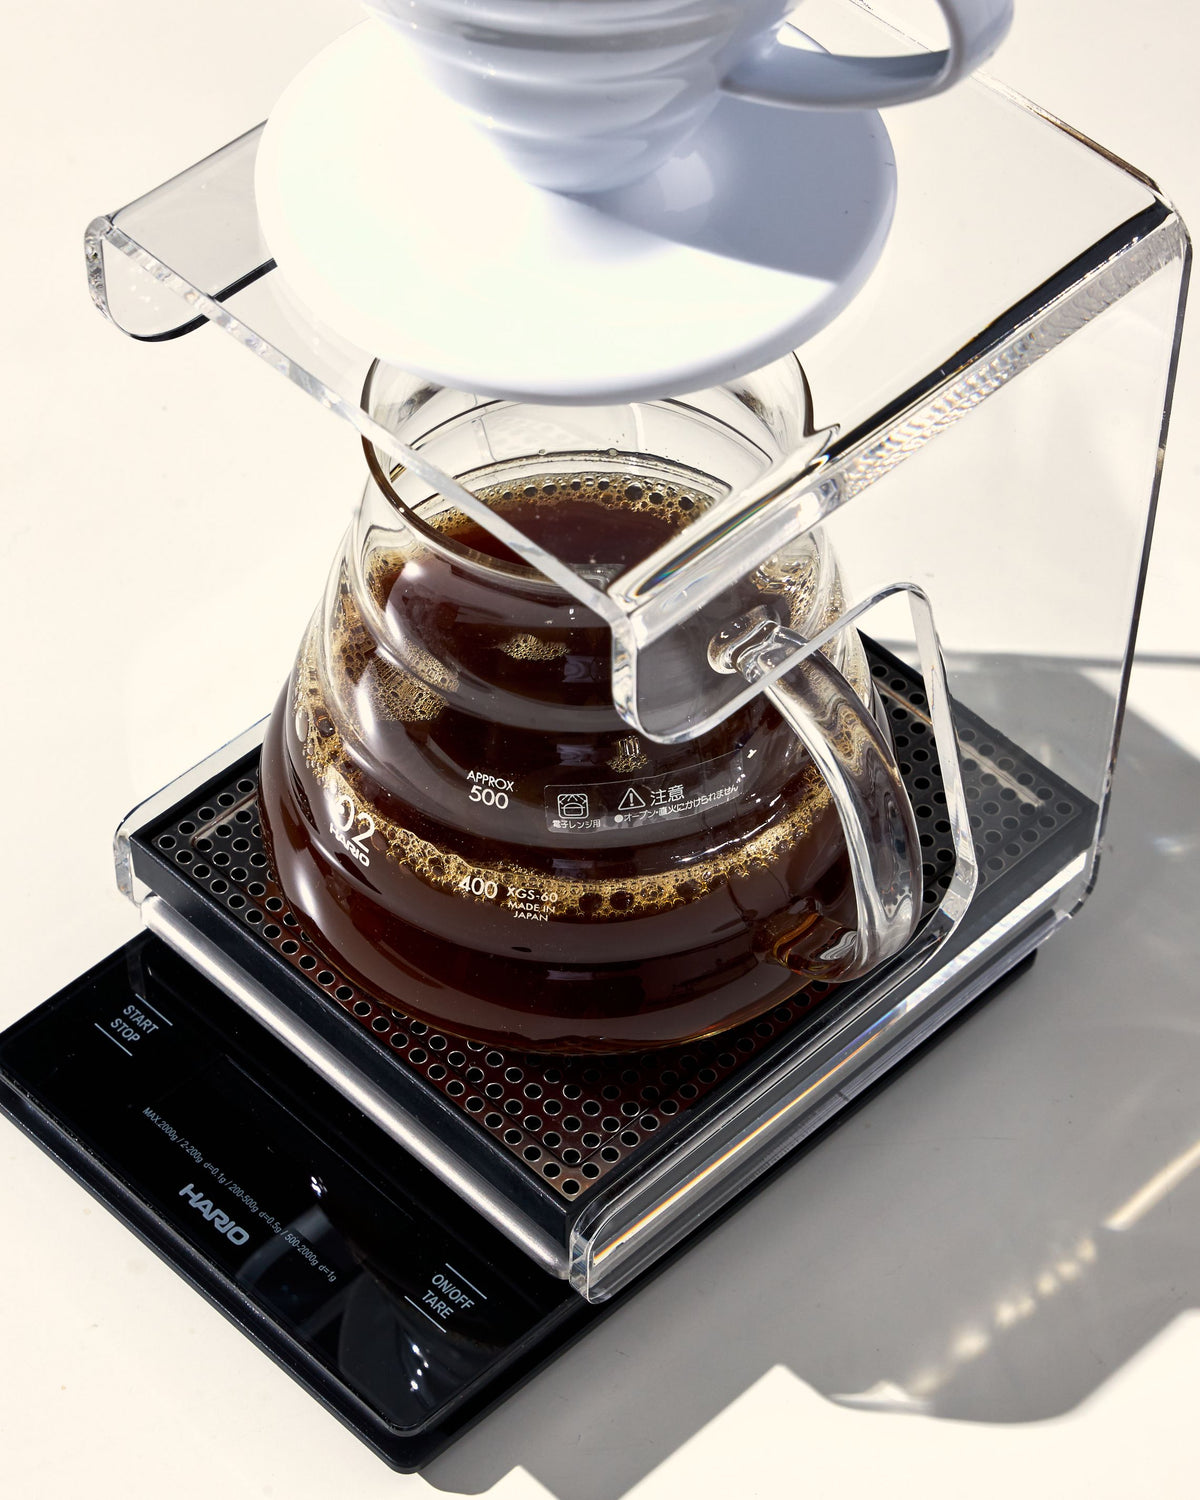 Hario V60 Drip Coffee Scale in Metal